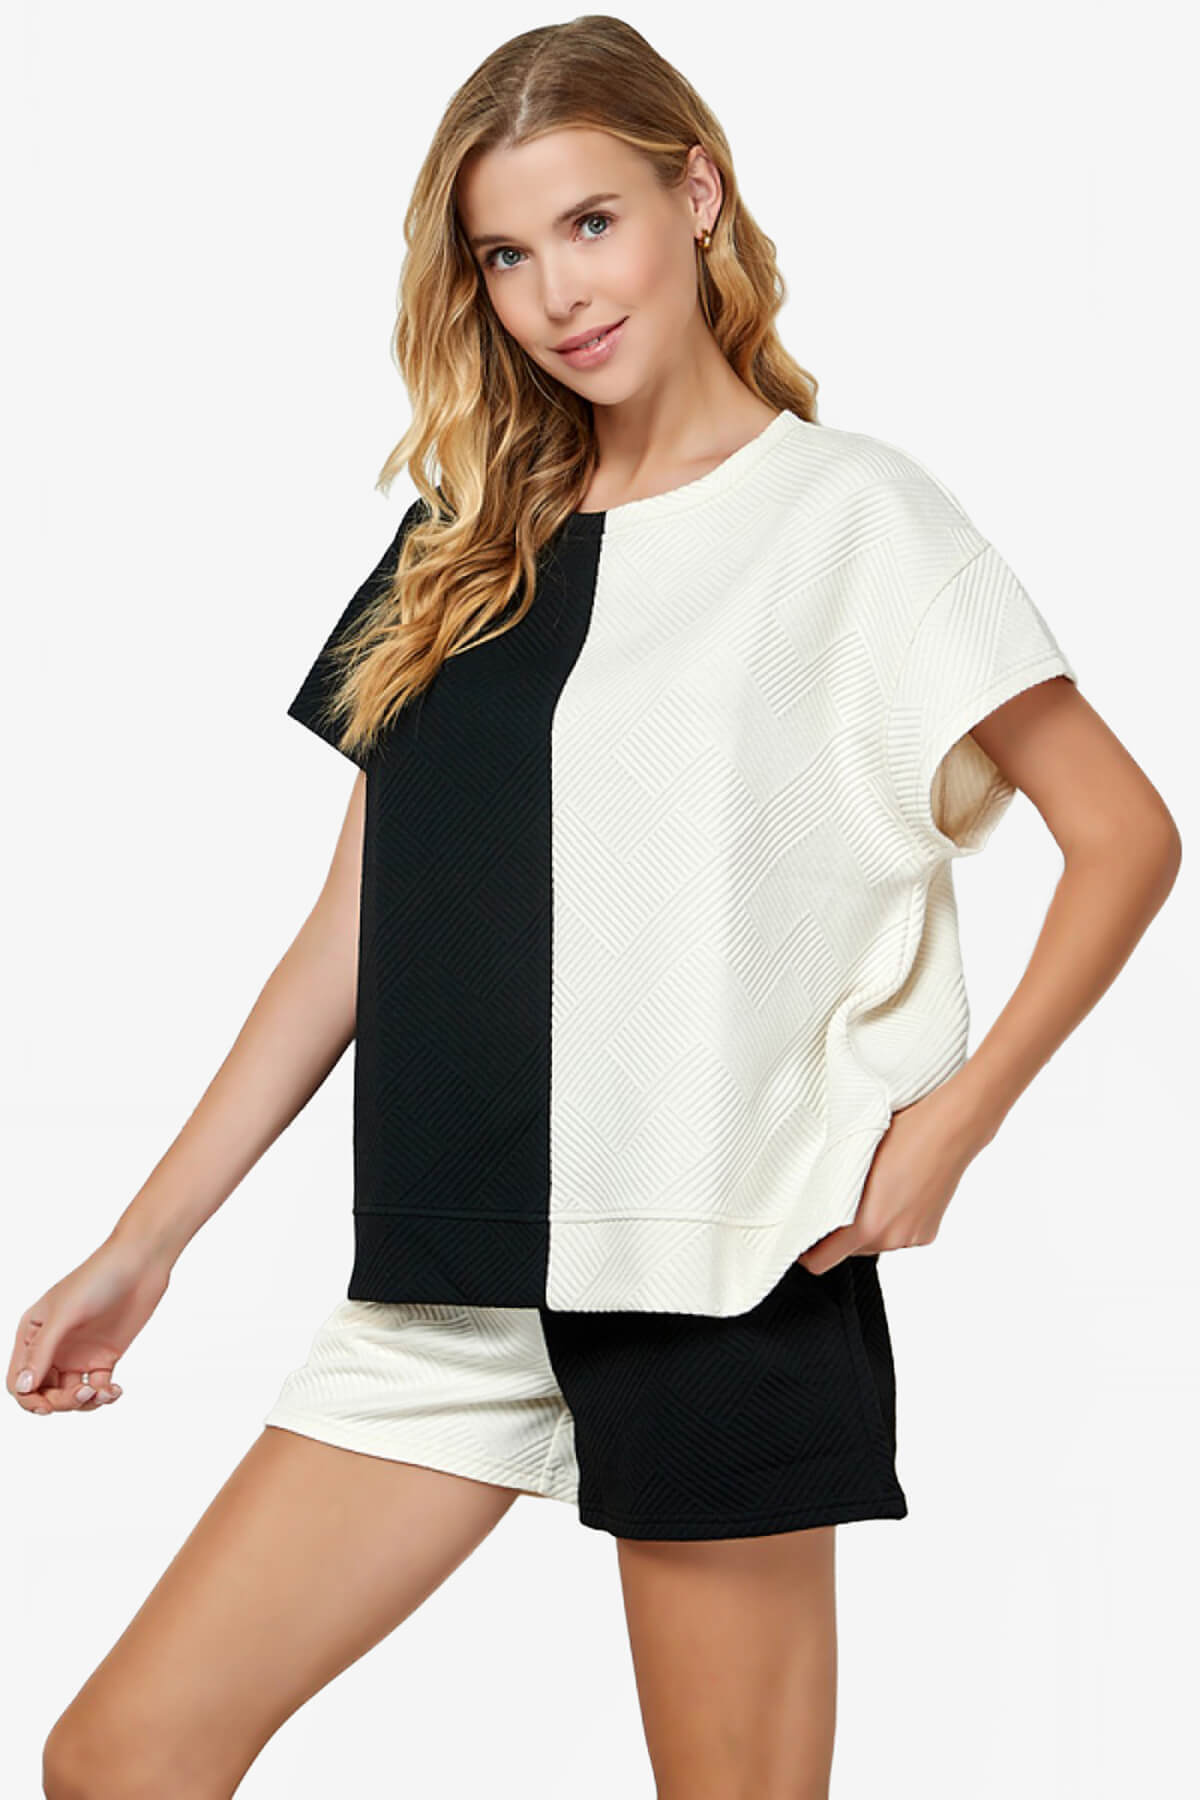 Lassy Textured Colorblock Short Sleeve Top BLACK AND WHITE_3